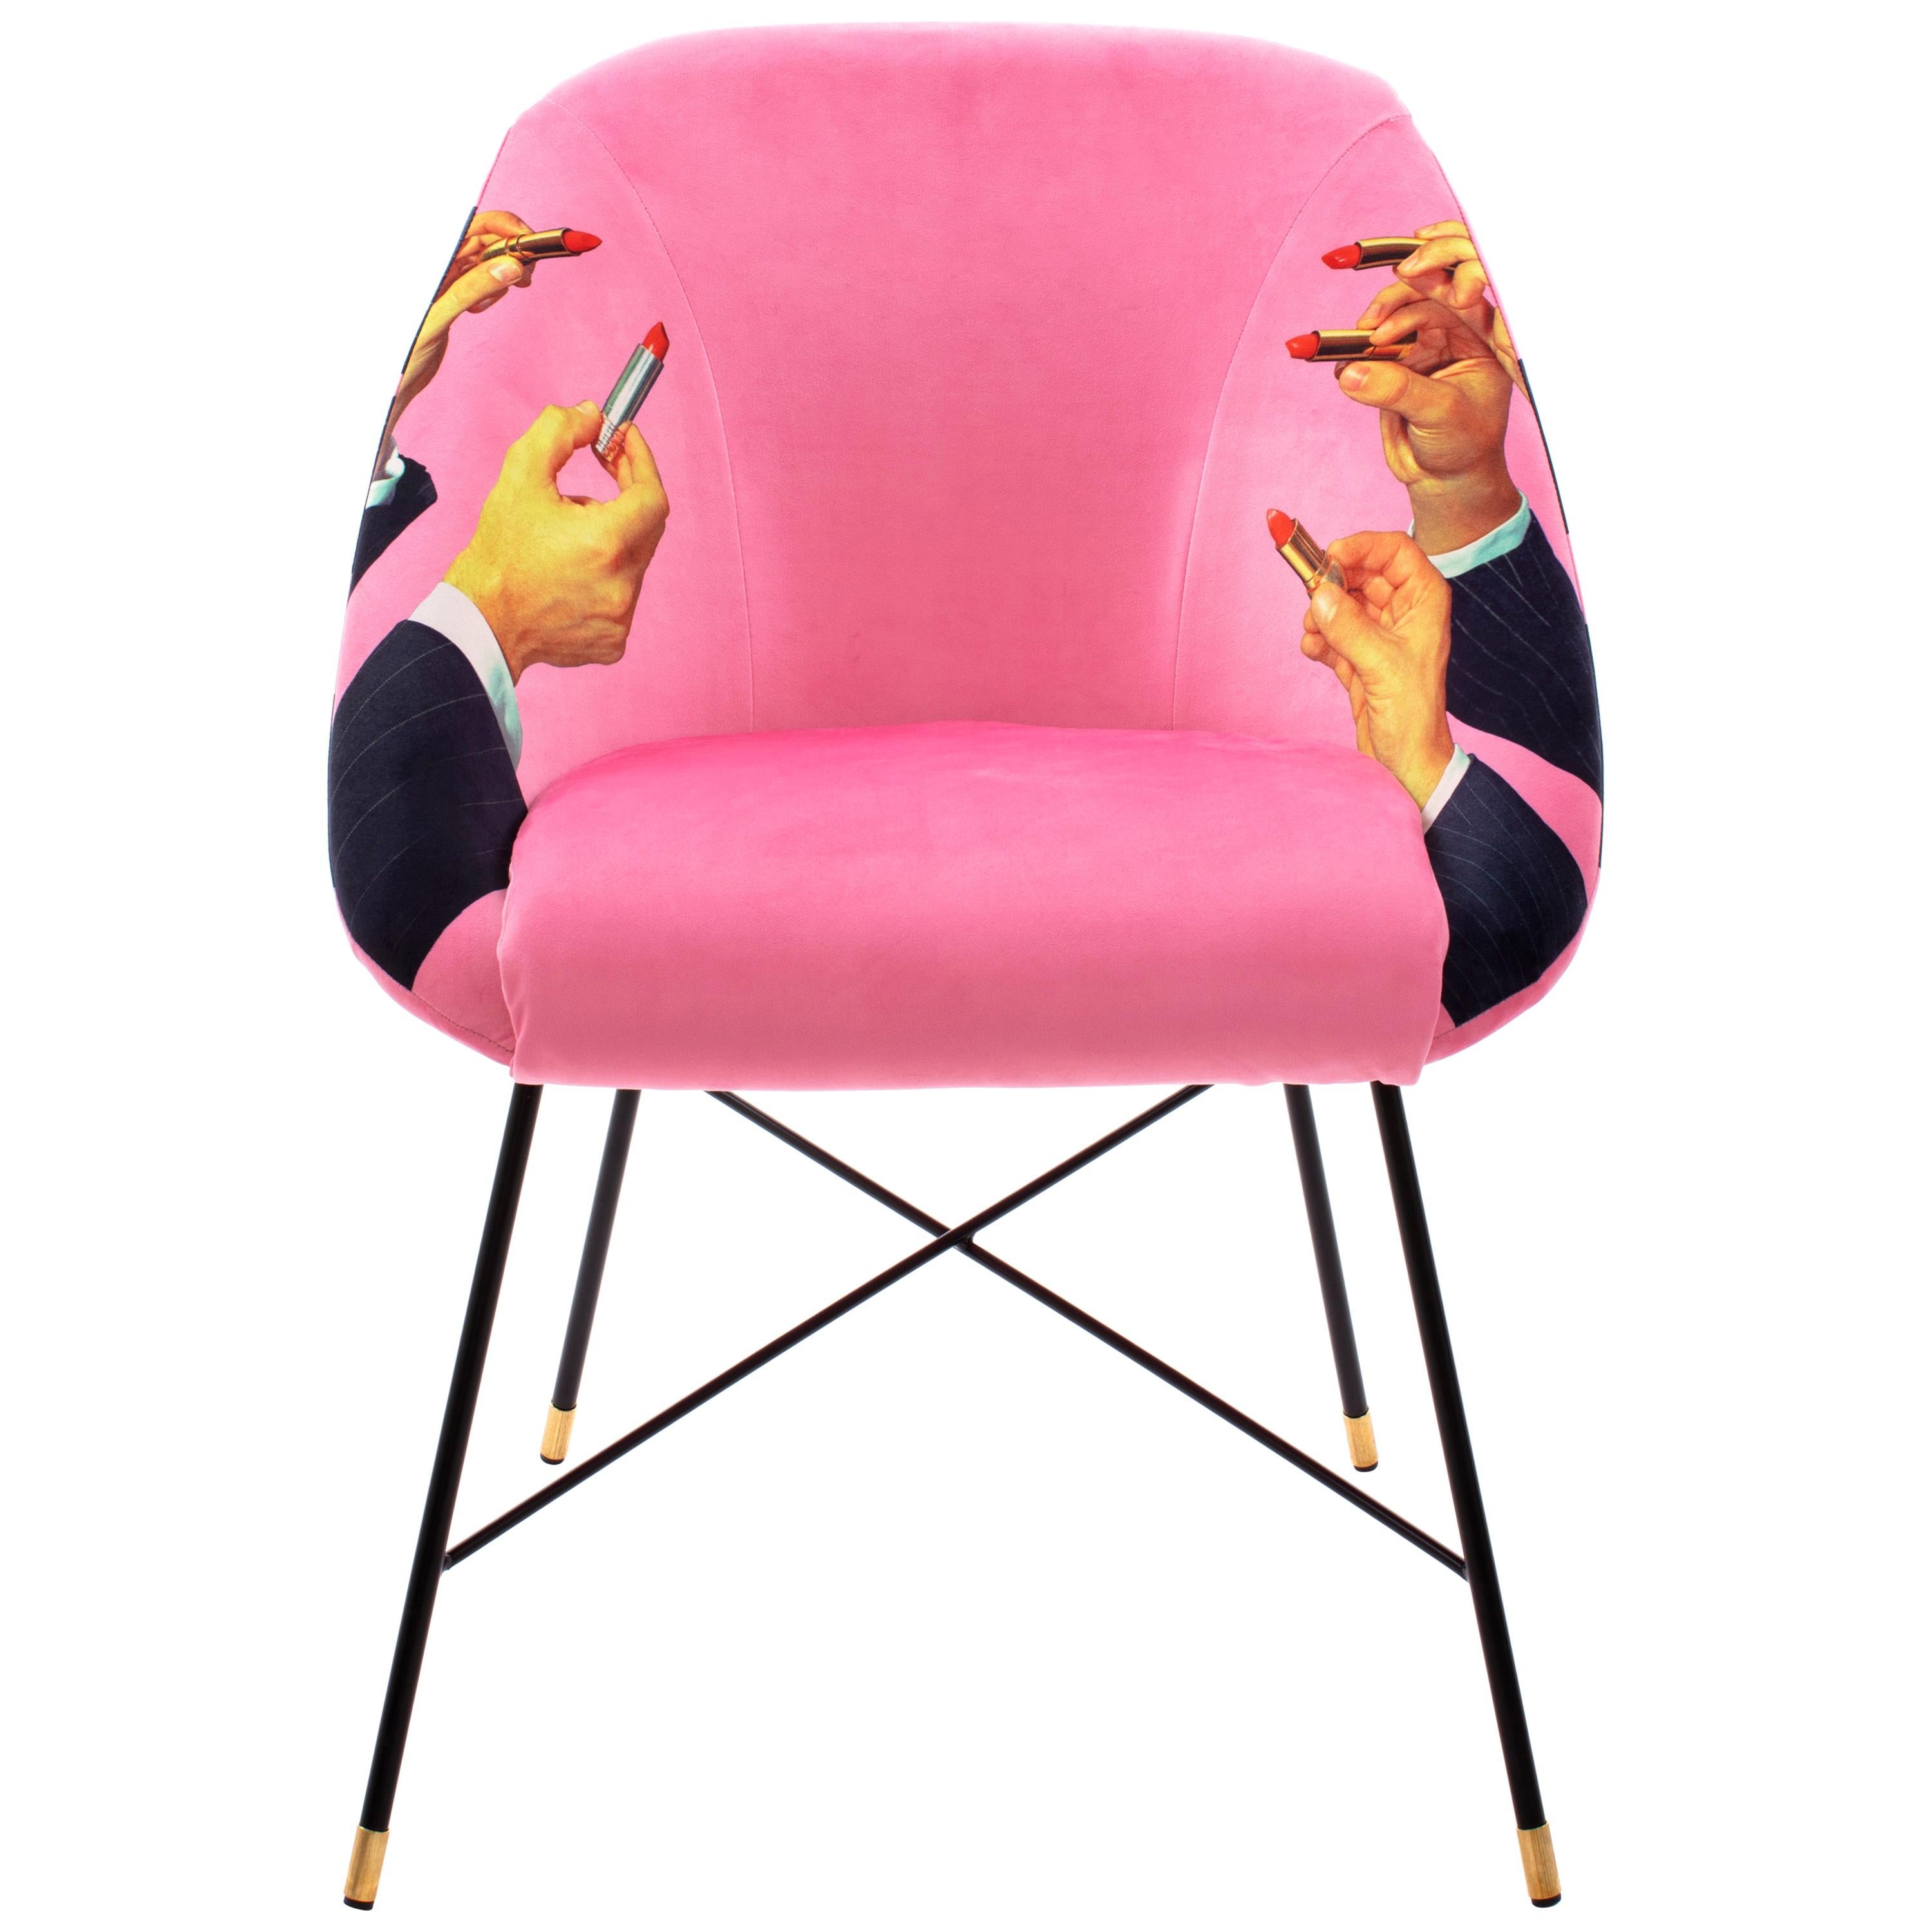 Seletti Pink "Lipsticks" Upholstered Occasional Chair by Toiletpaper